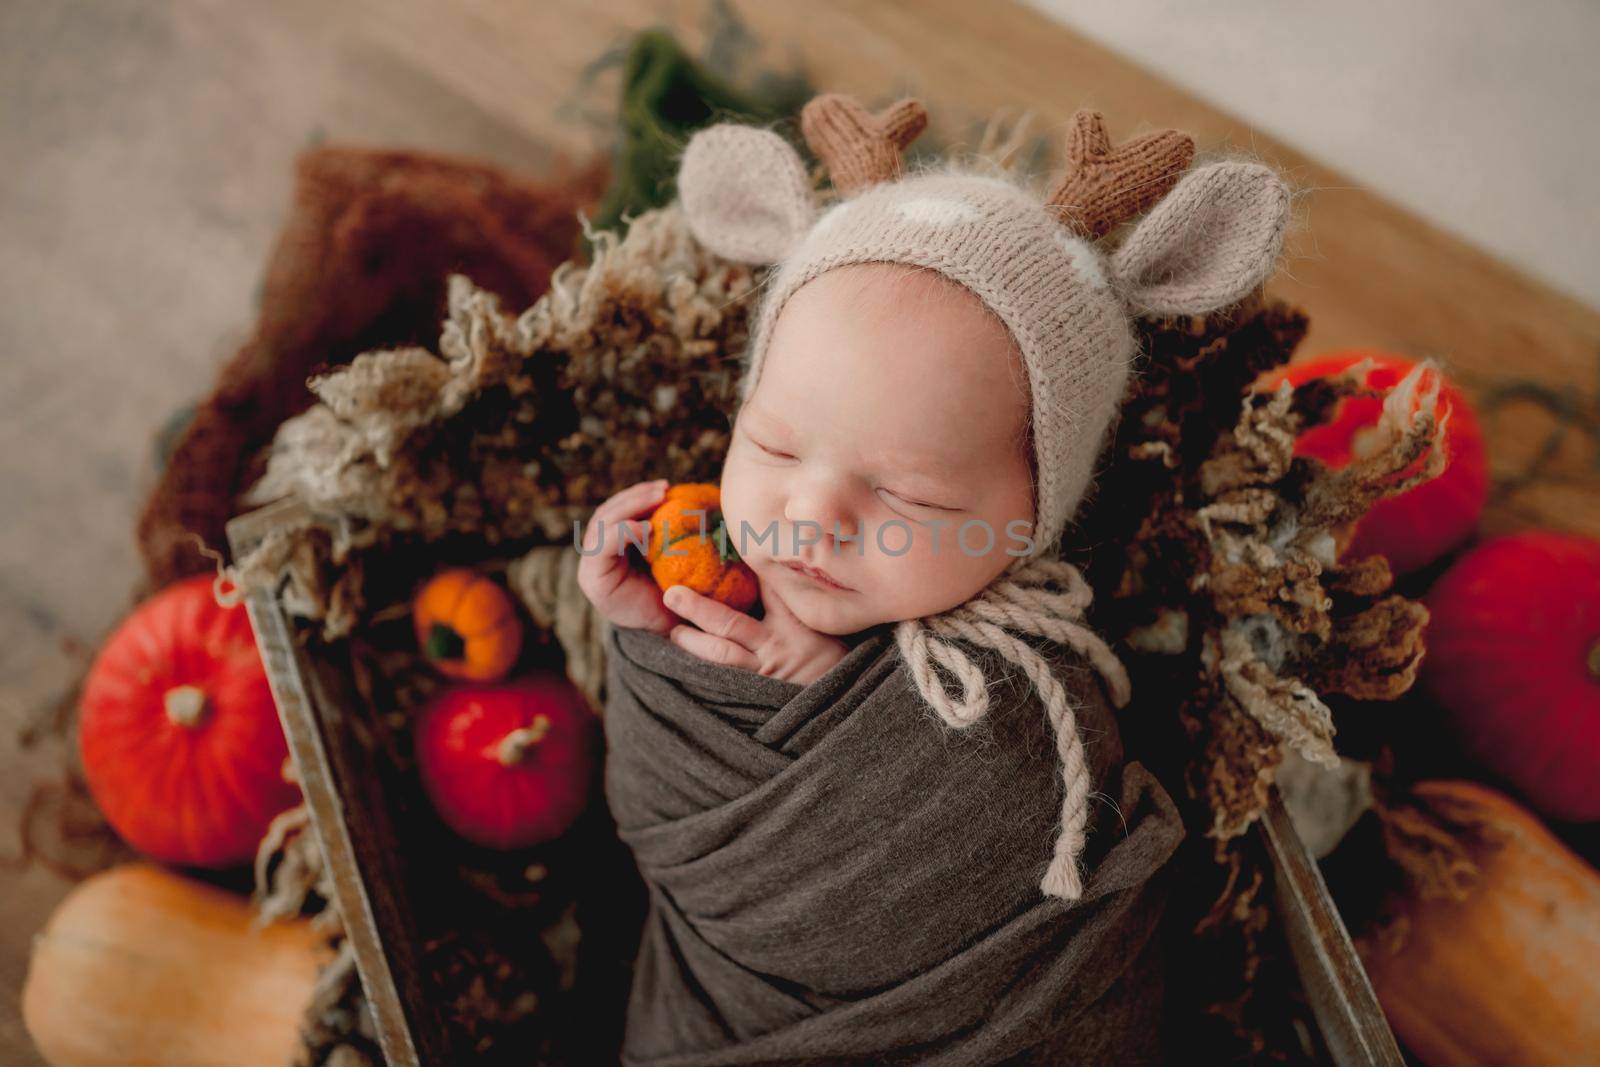 Newborn baby boy swaddled in fabric sleeping with knitted pumpkins toys. Adorable infant child kid sleeping studio halloween portrait